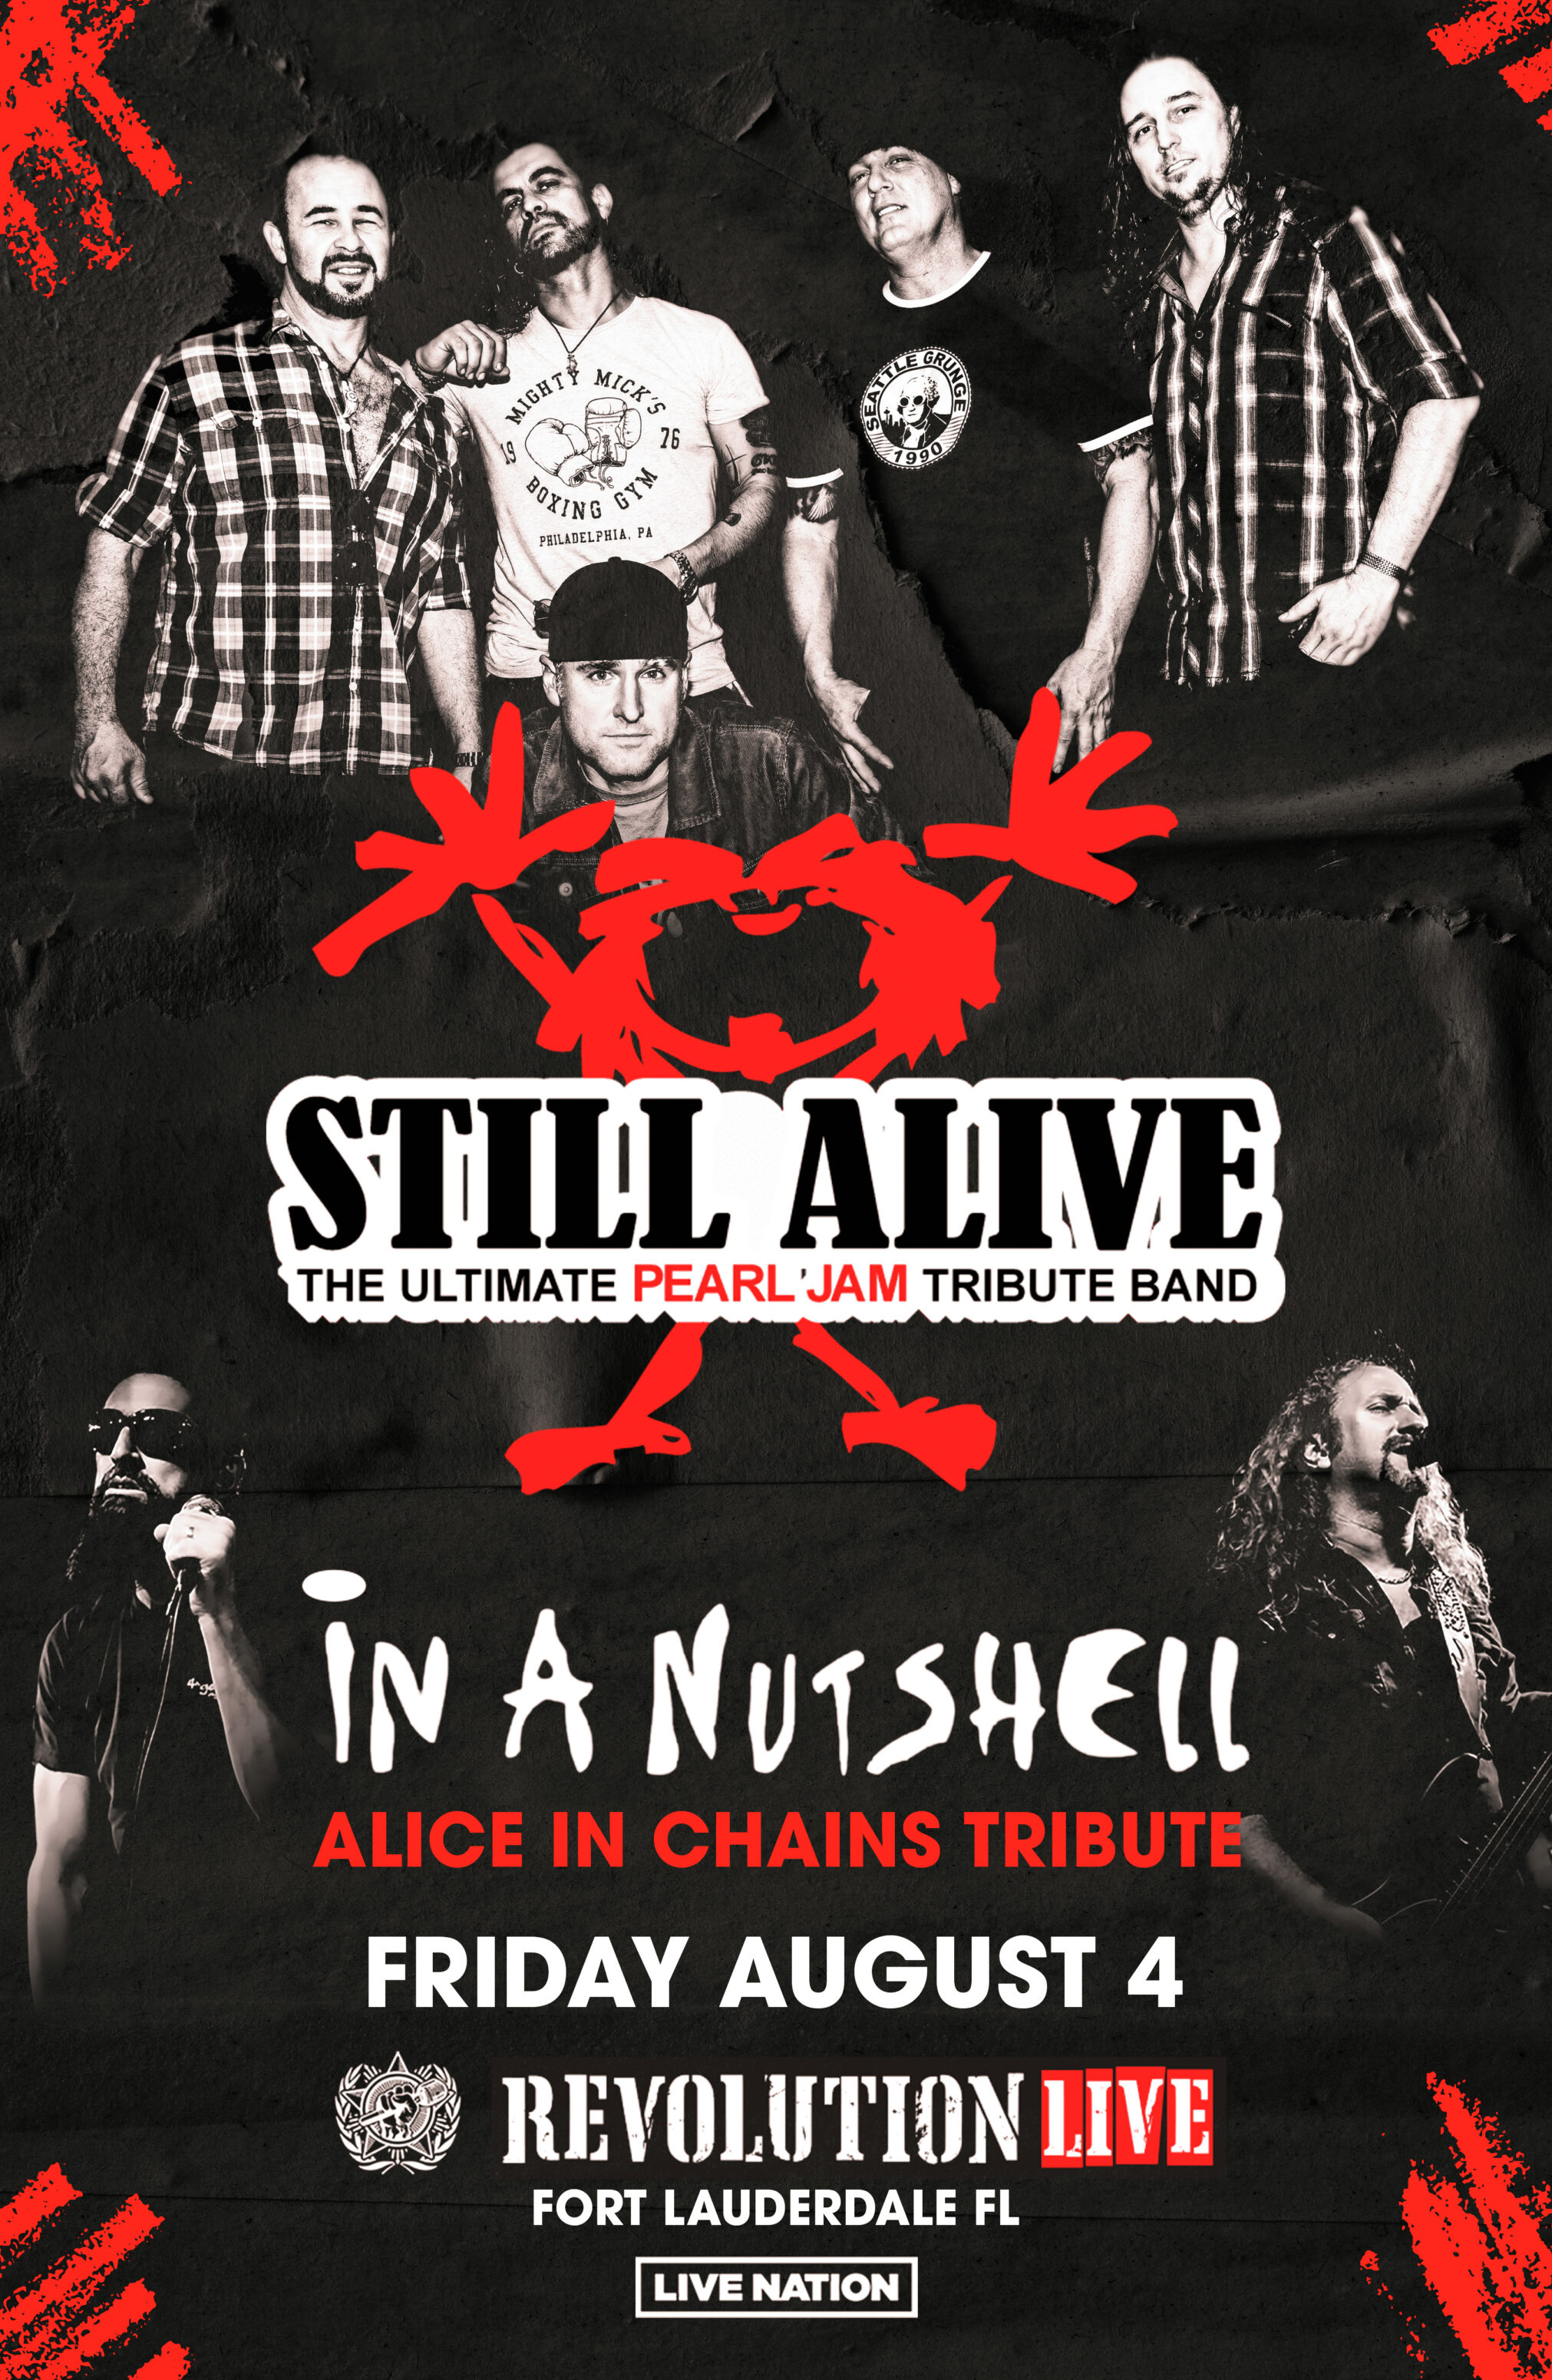 Still Alive: Pearl Jam Tribute Experience with In A Nutshell - Alice in Chains Tribute